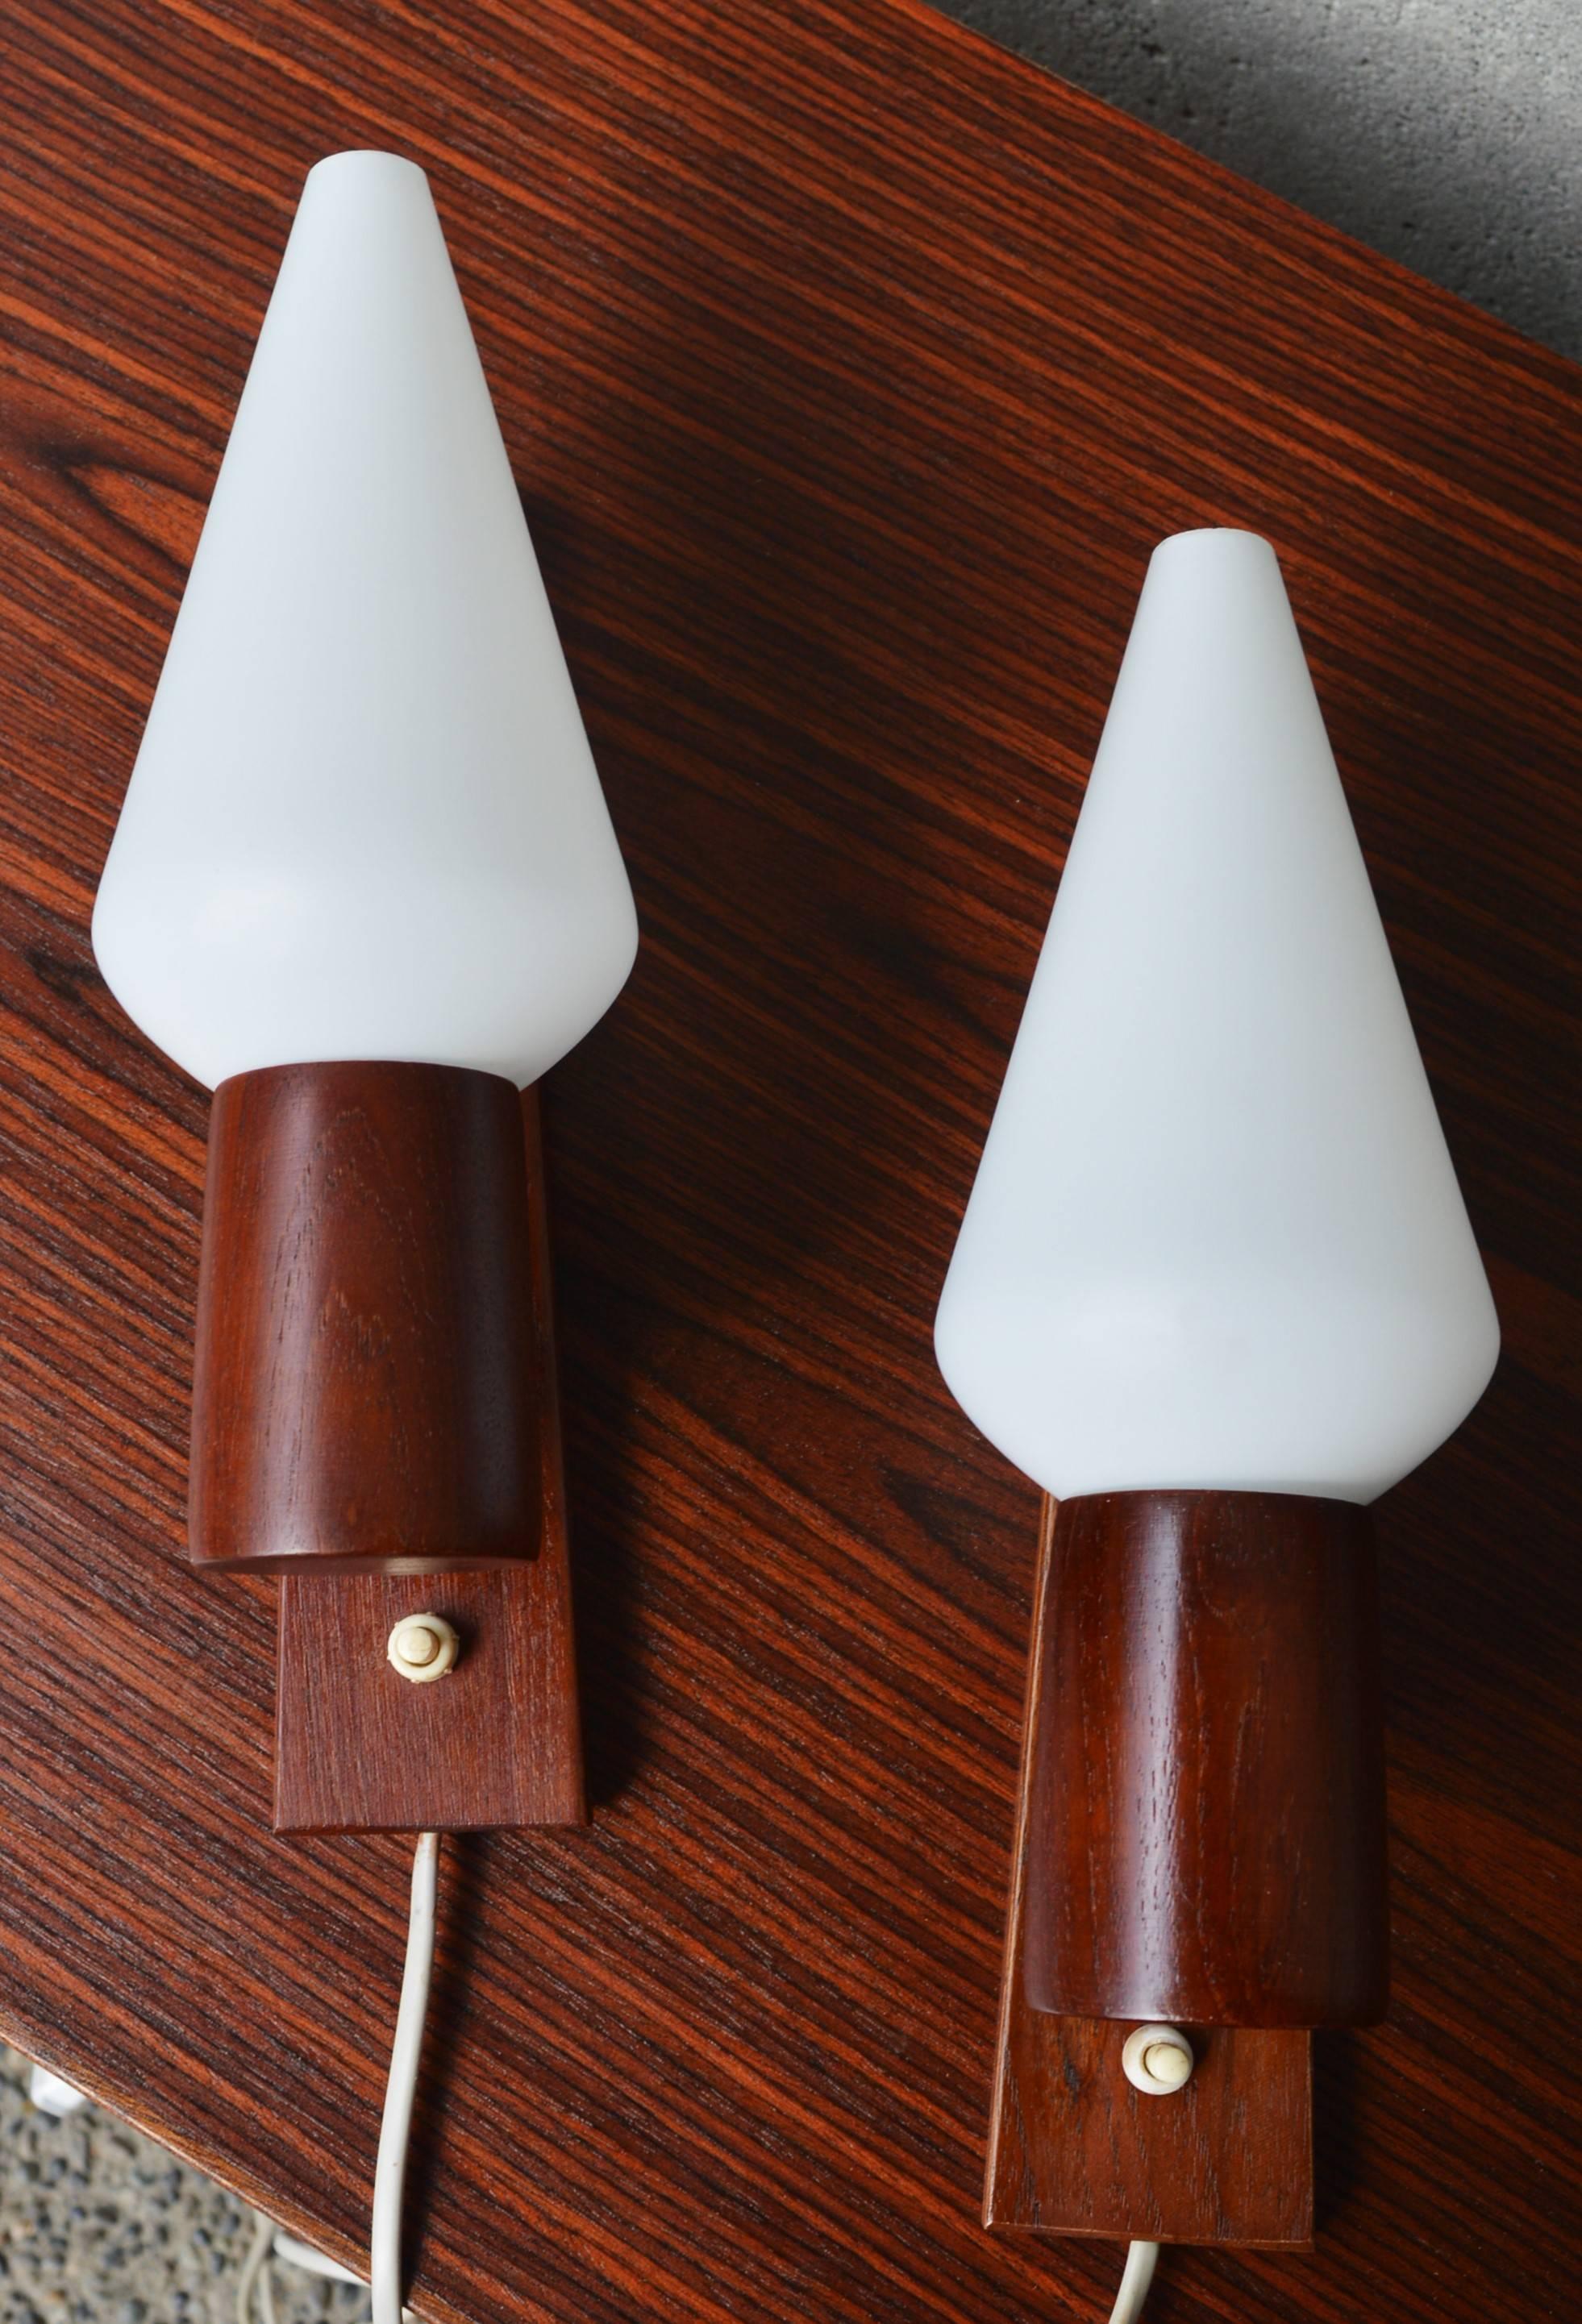 Art Glass Pair of Danish Modern Teak Wall Sconces with Conical Frosted White Glass Shades